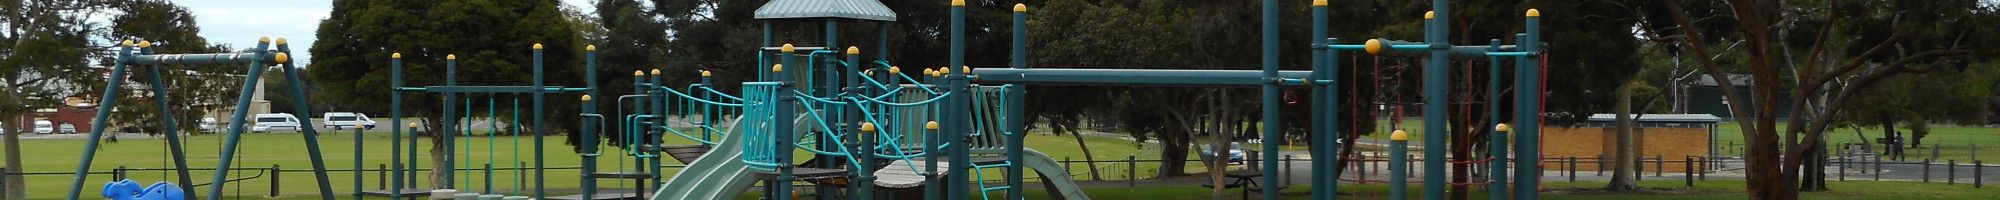 Greaves Reserve playground